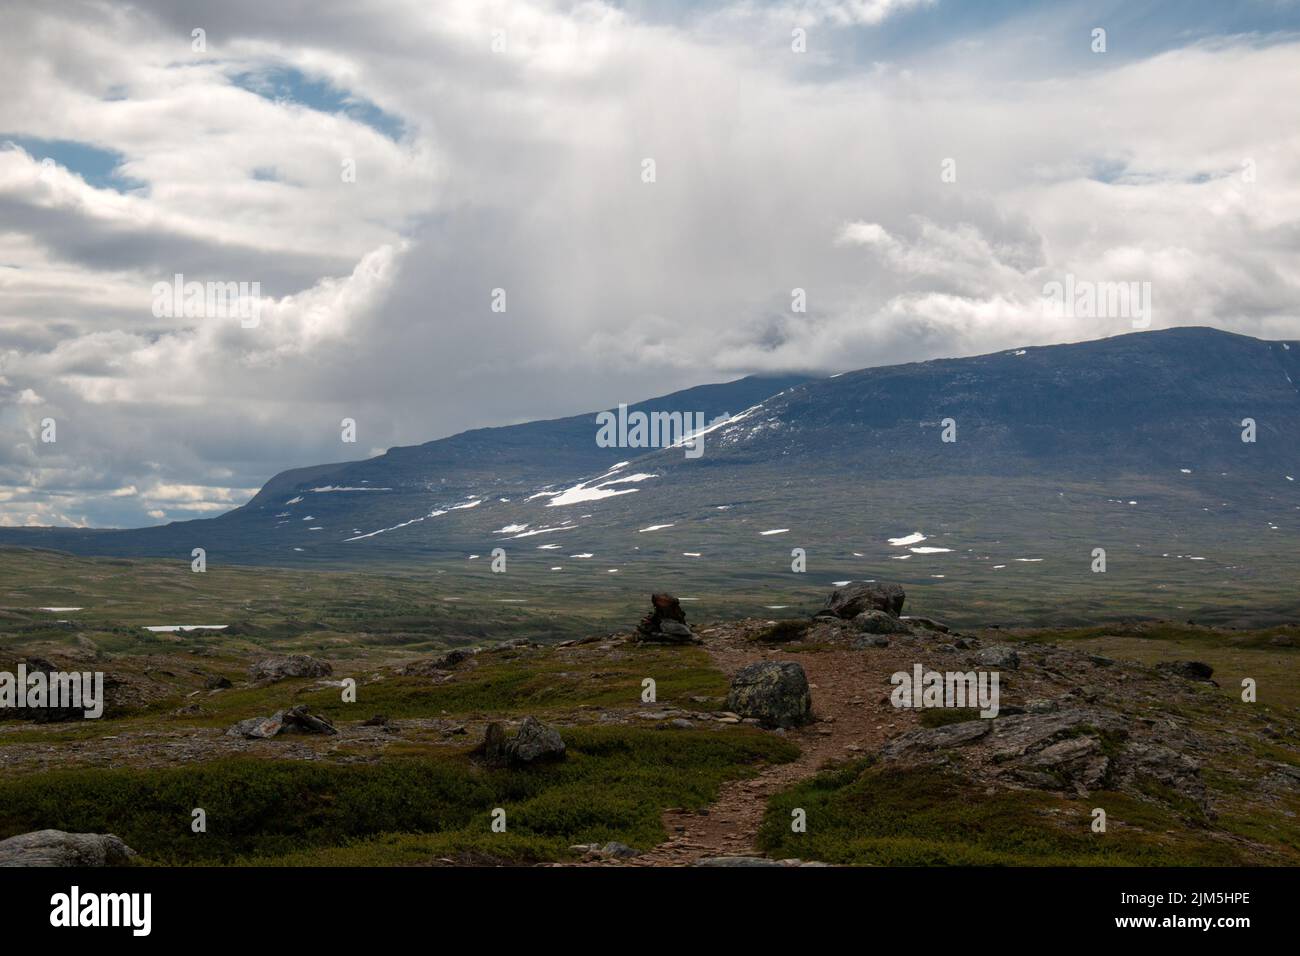 Rain clouds gathering above the hiking trail between Sylarna and Helags mountain stations, Jamtland, Sweden Stock Photo